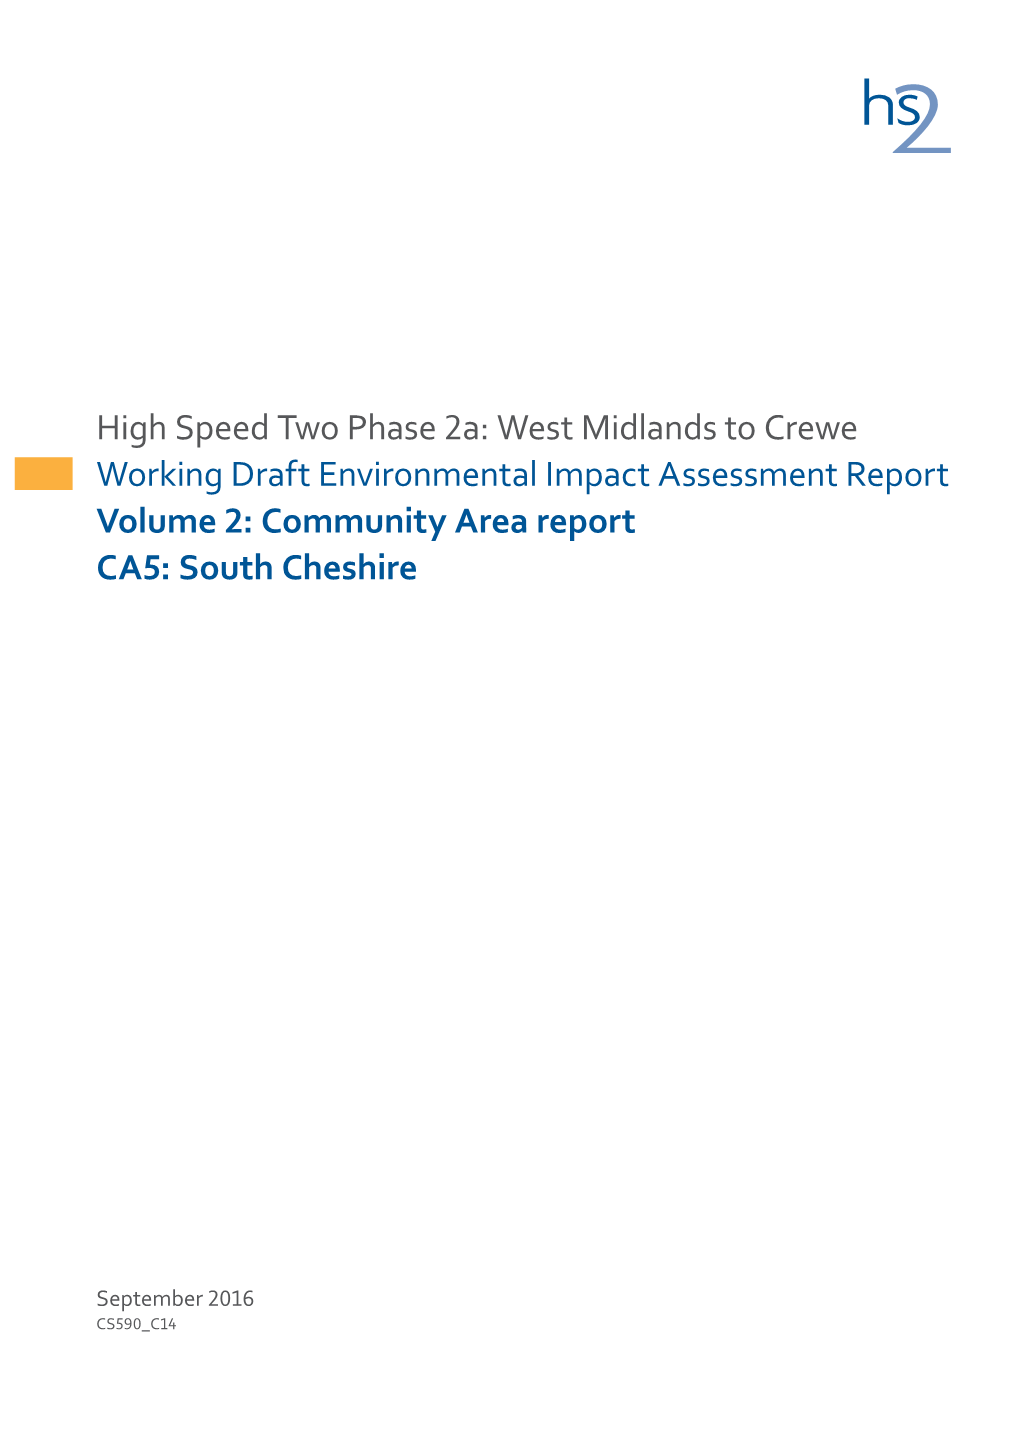 High Speed Two Phase 2A: West Midlands to Crewe Working Draft Environmental Impact Assessment Report Volume 2: Community Area Report CA5: South Cheshire